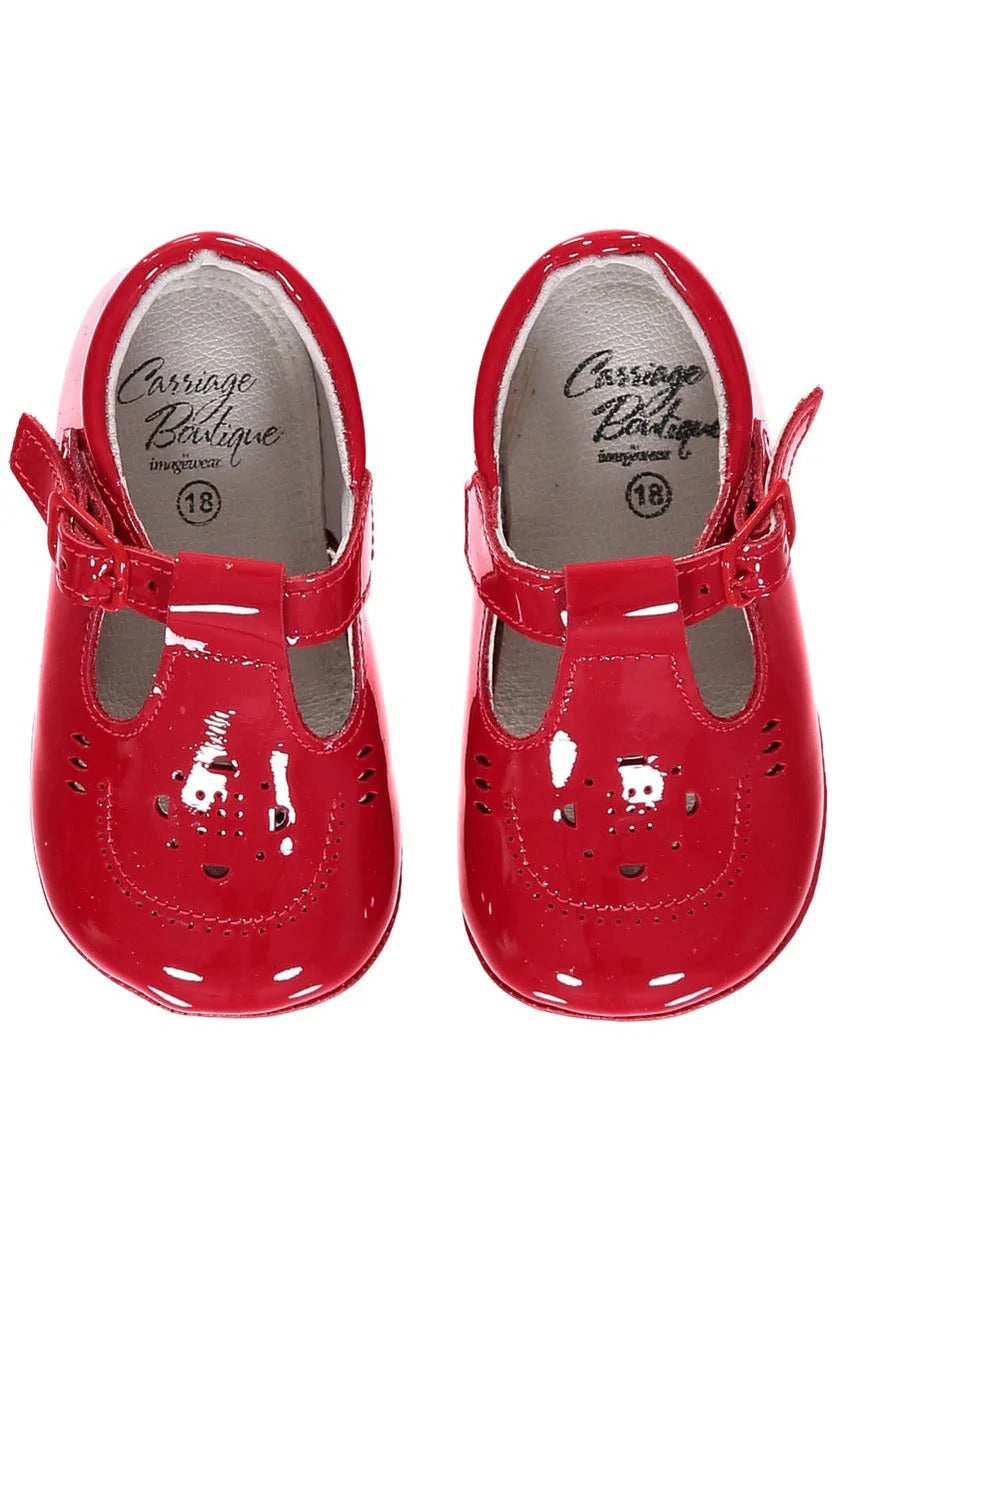 Baby Shoes - Carriage Boutique